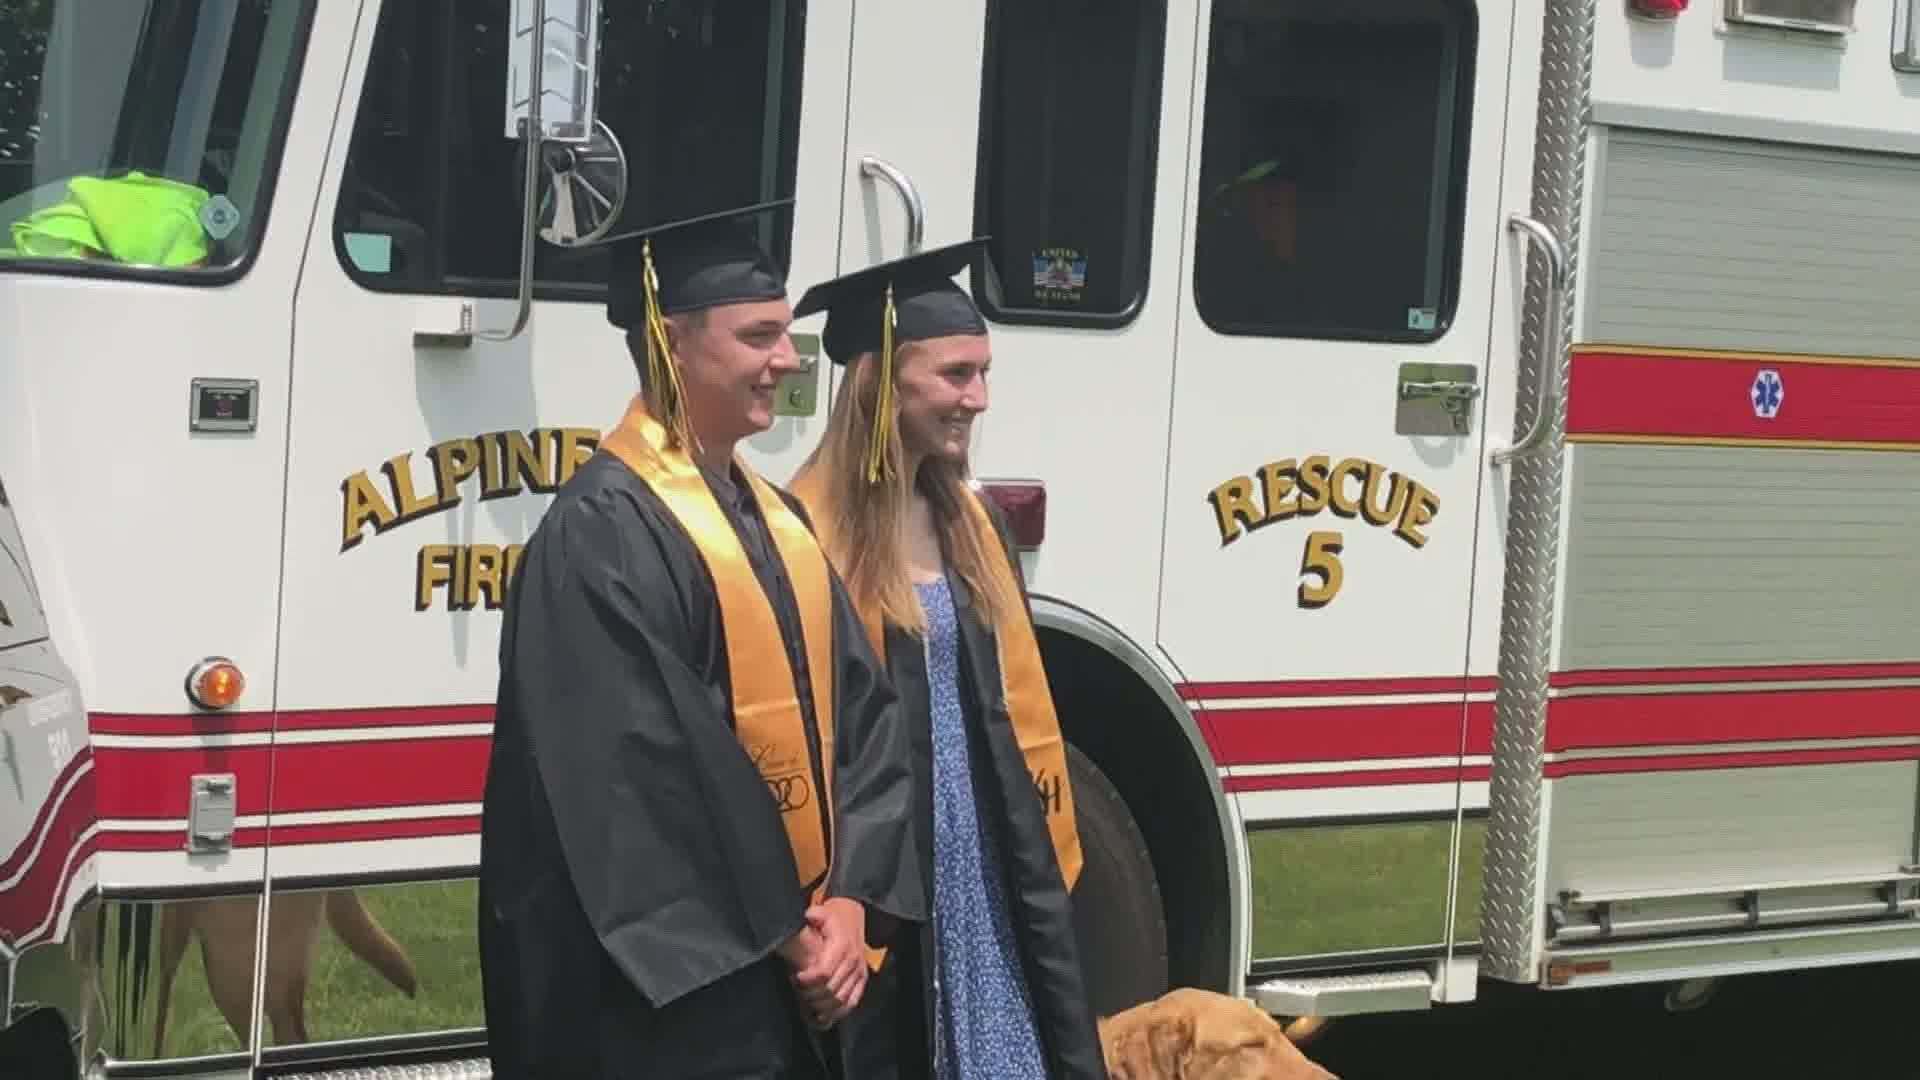 Celebrating the Class of 2020 has been a work in improvisation. The district came up with a fun solution for how to get graduates their diplomas.